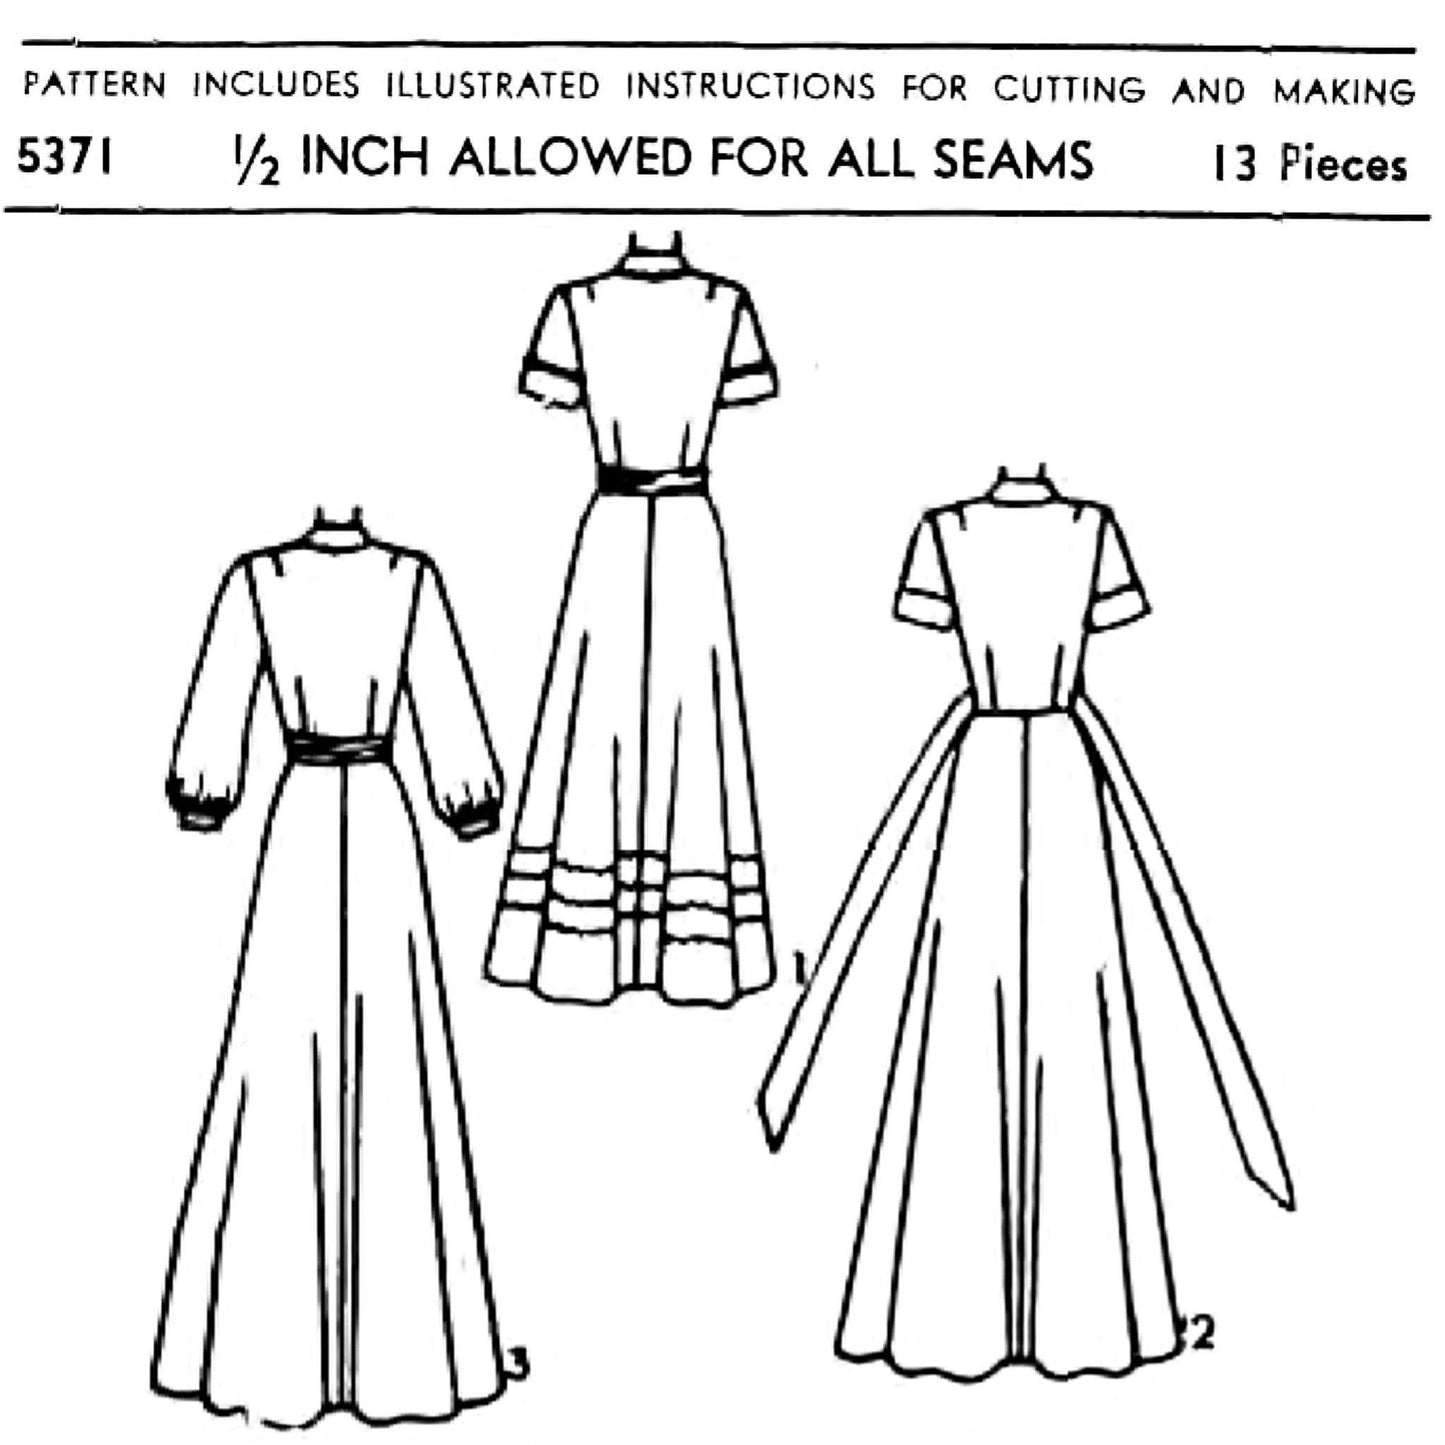 Line drawing of a nightgown